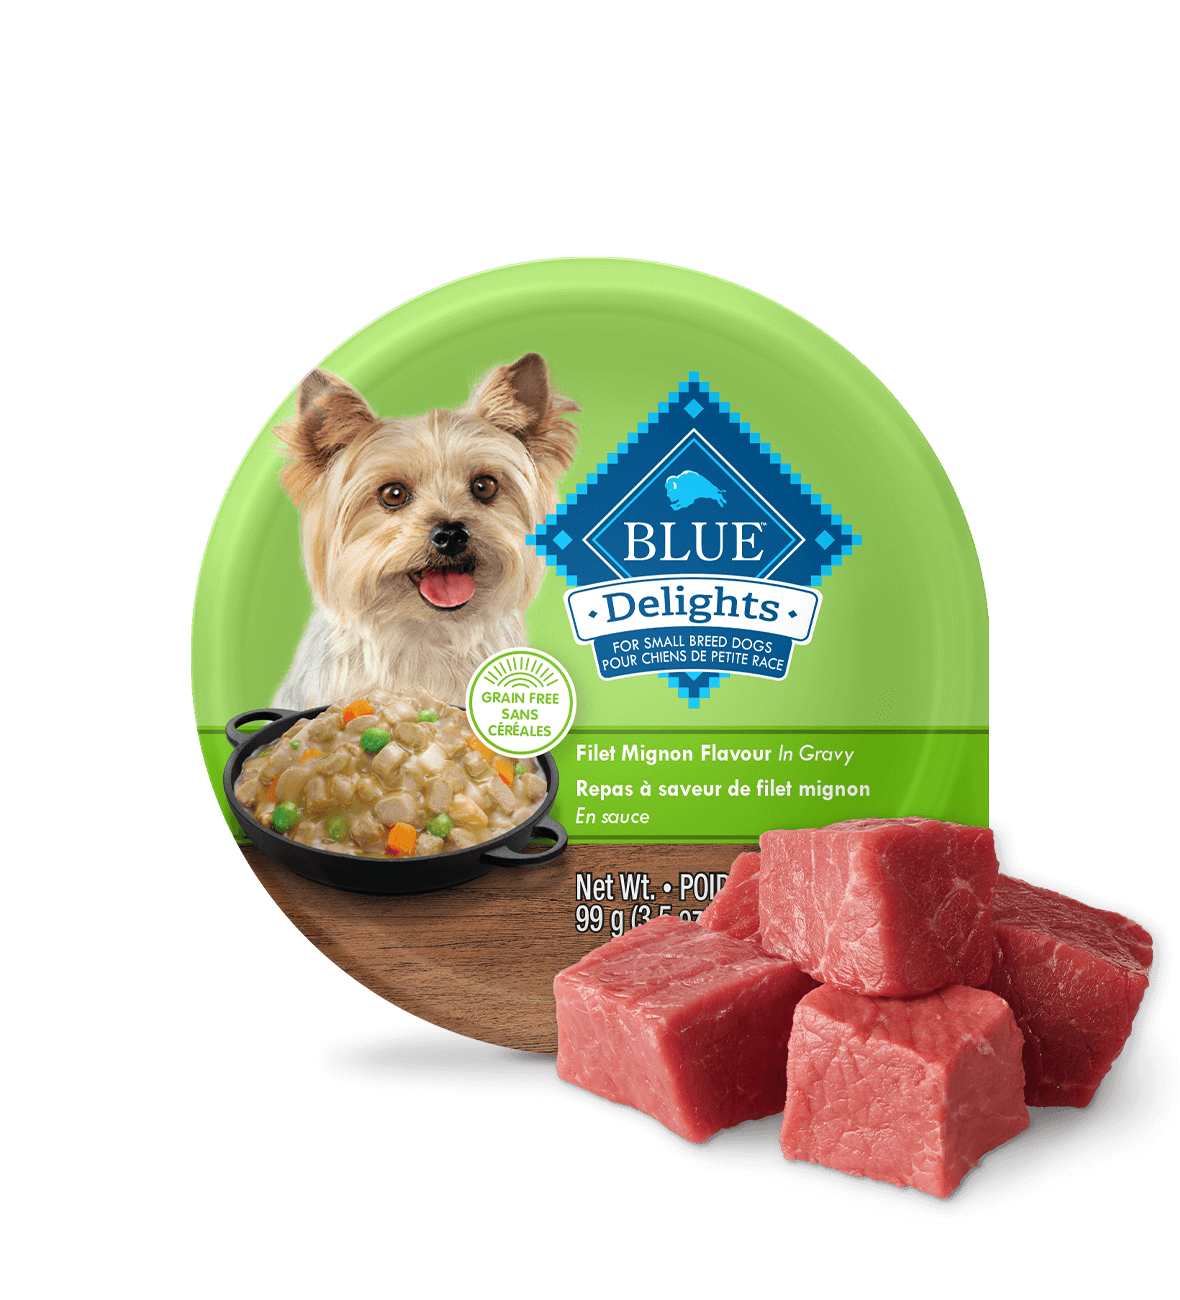 blue delights filet mignon flavour in hearty gravy dog wet food